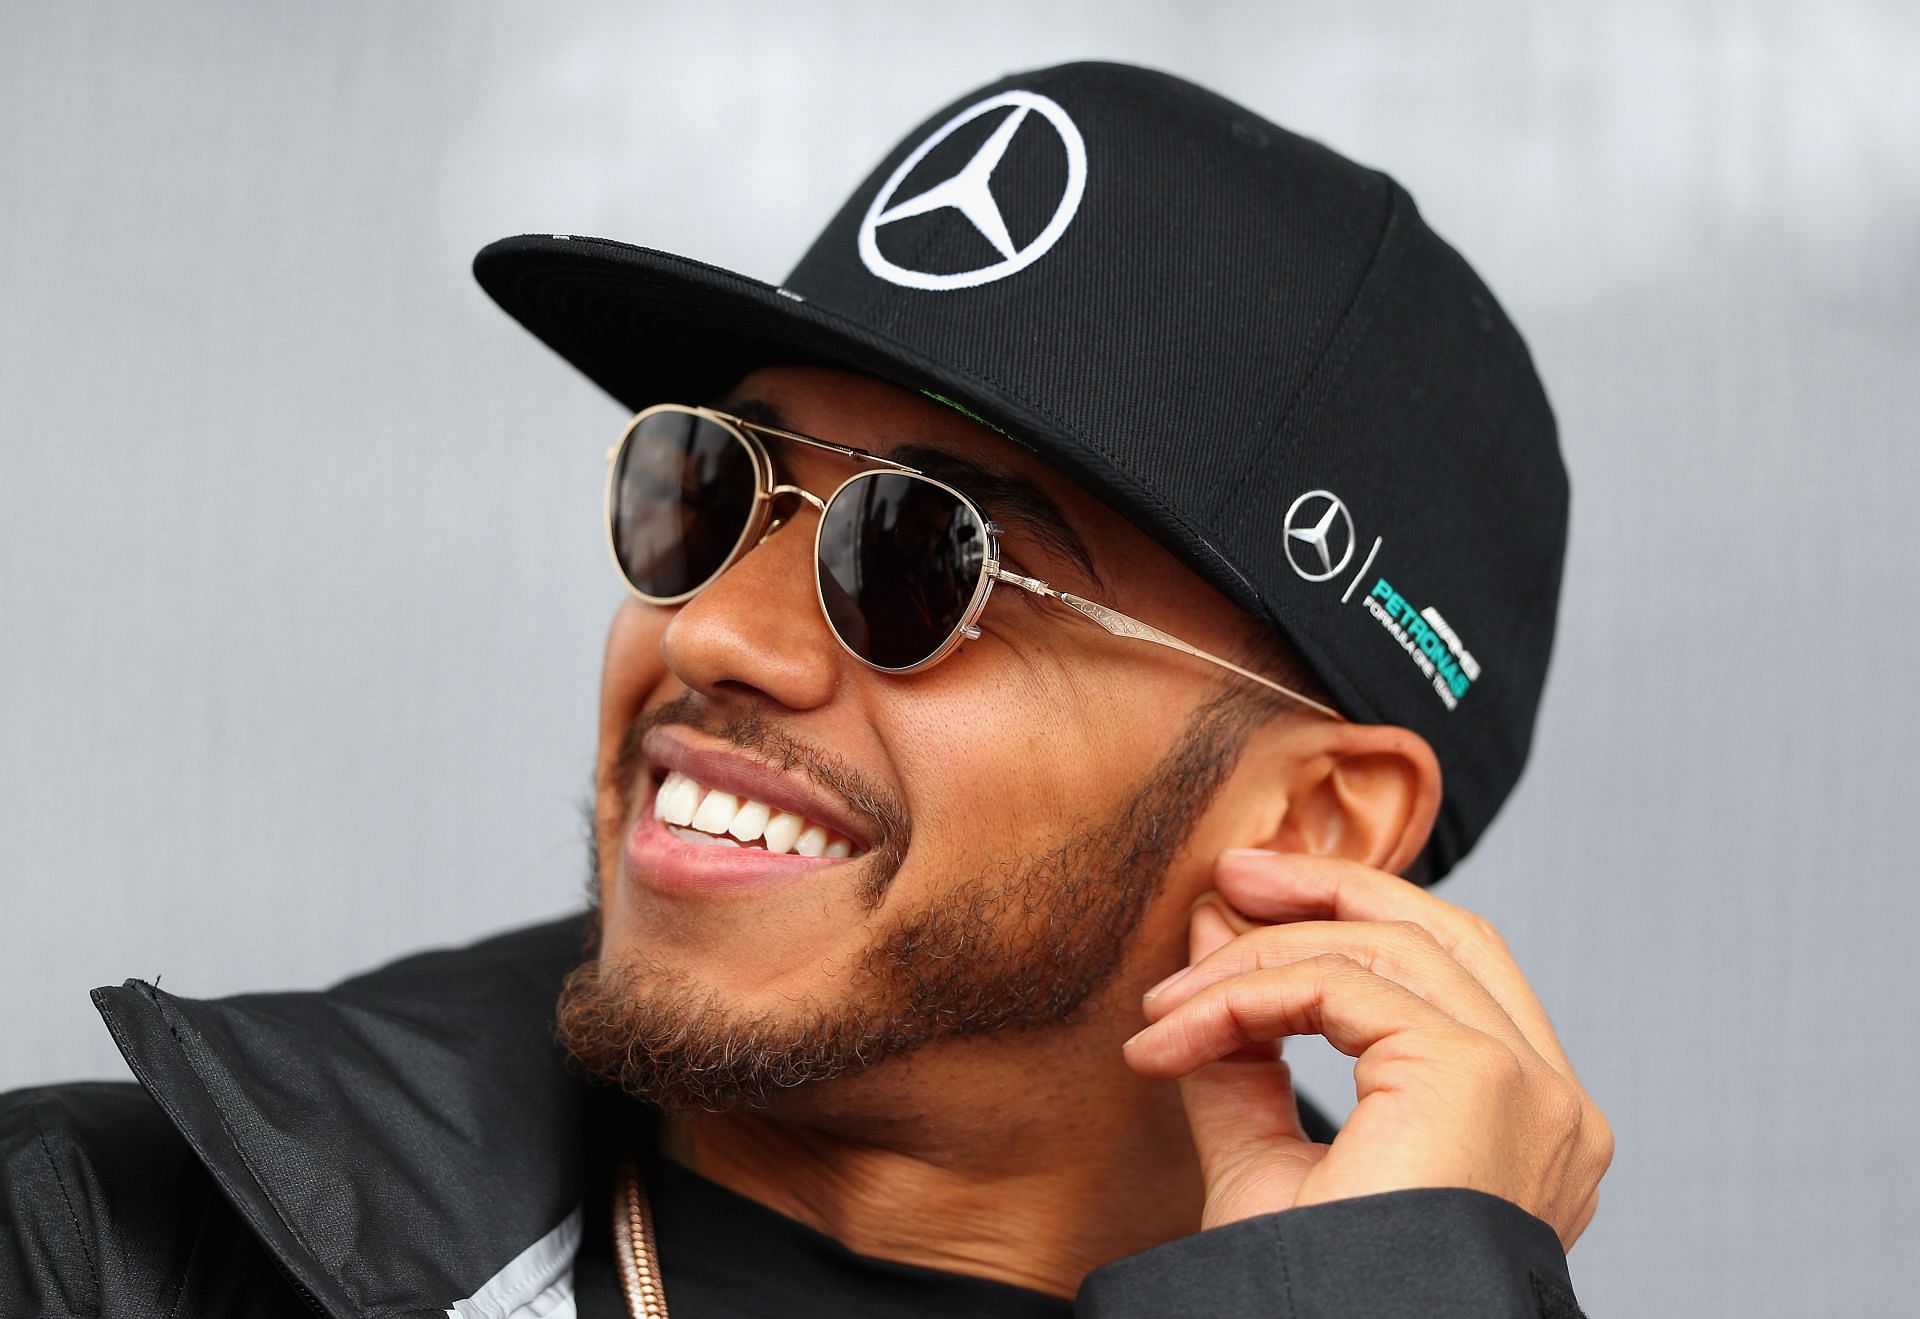 Lewis Hamilton was spotted by the fans during a promotional event in Malaysia